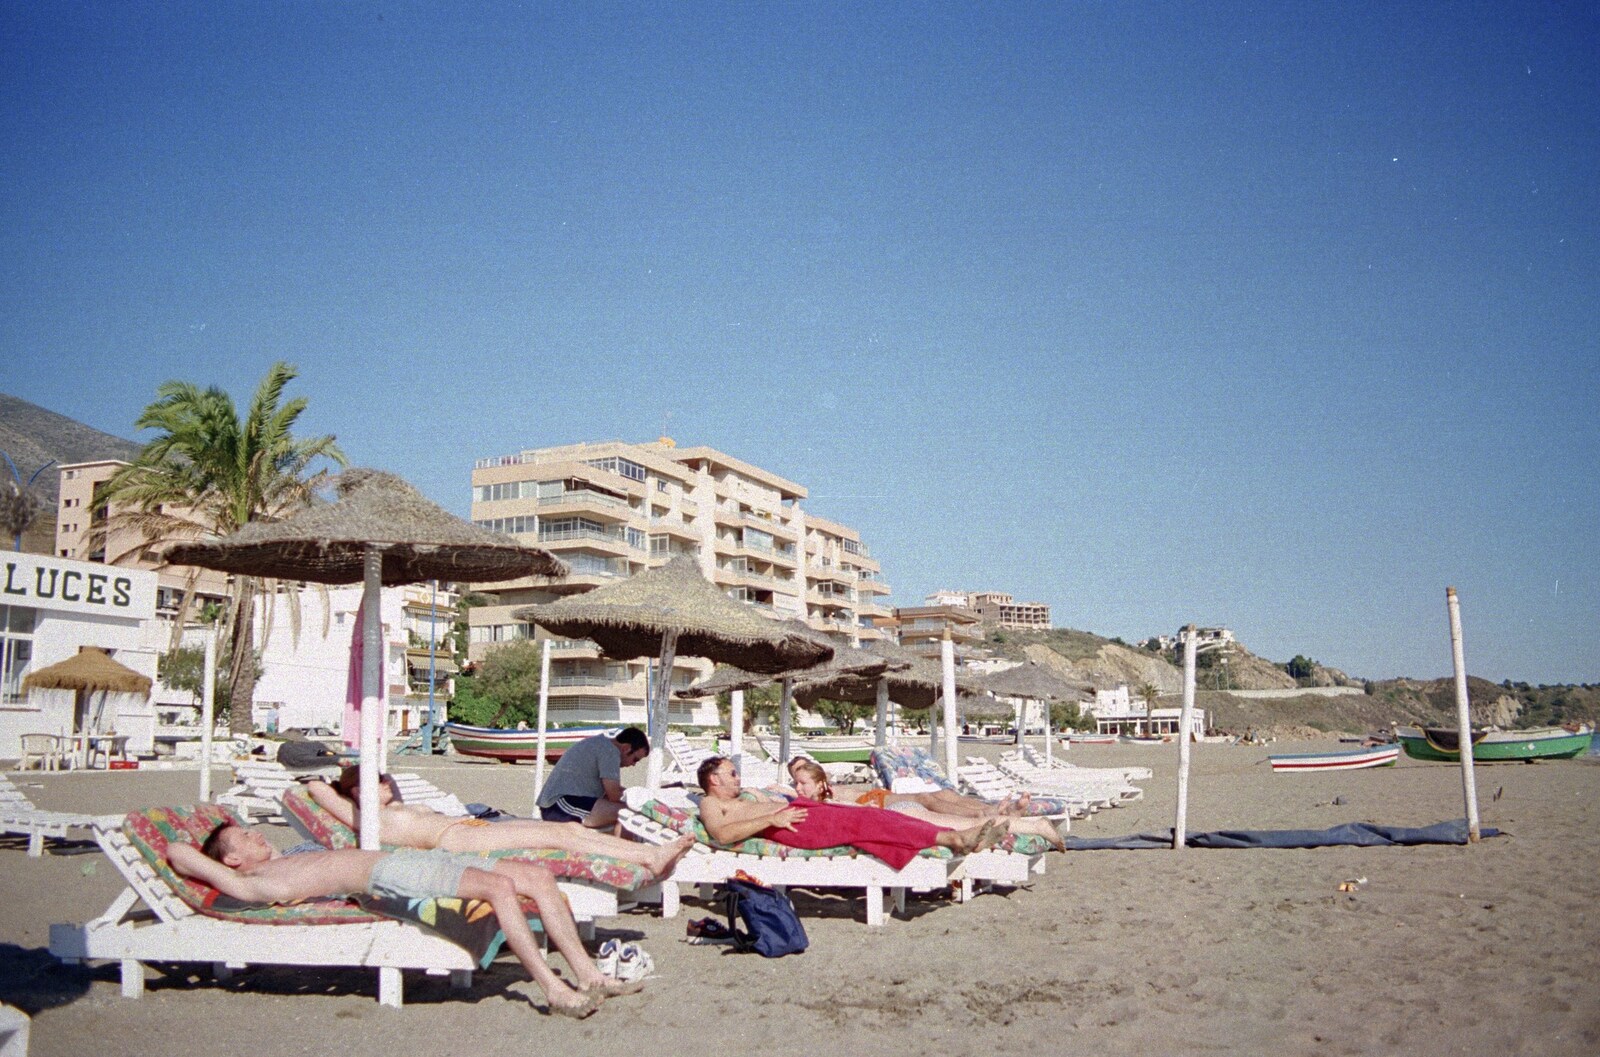 Sun loungers and thatched parasols from The CISU Massive do Malaga, Spain - November 14th 1998